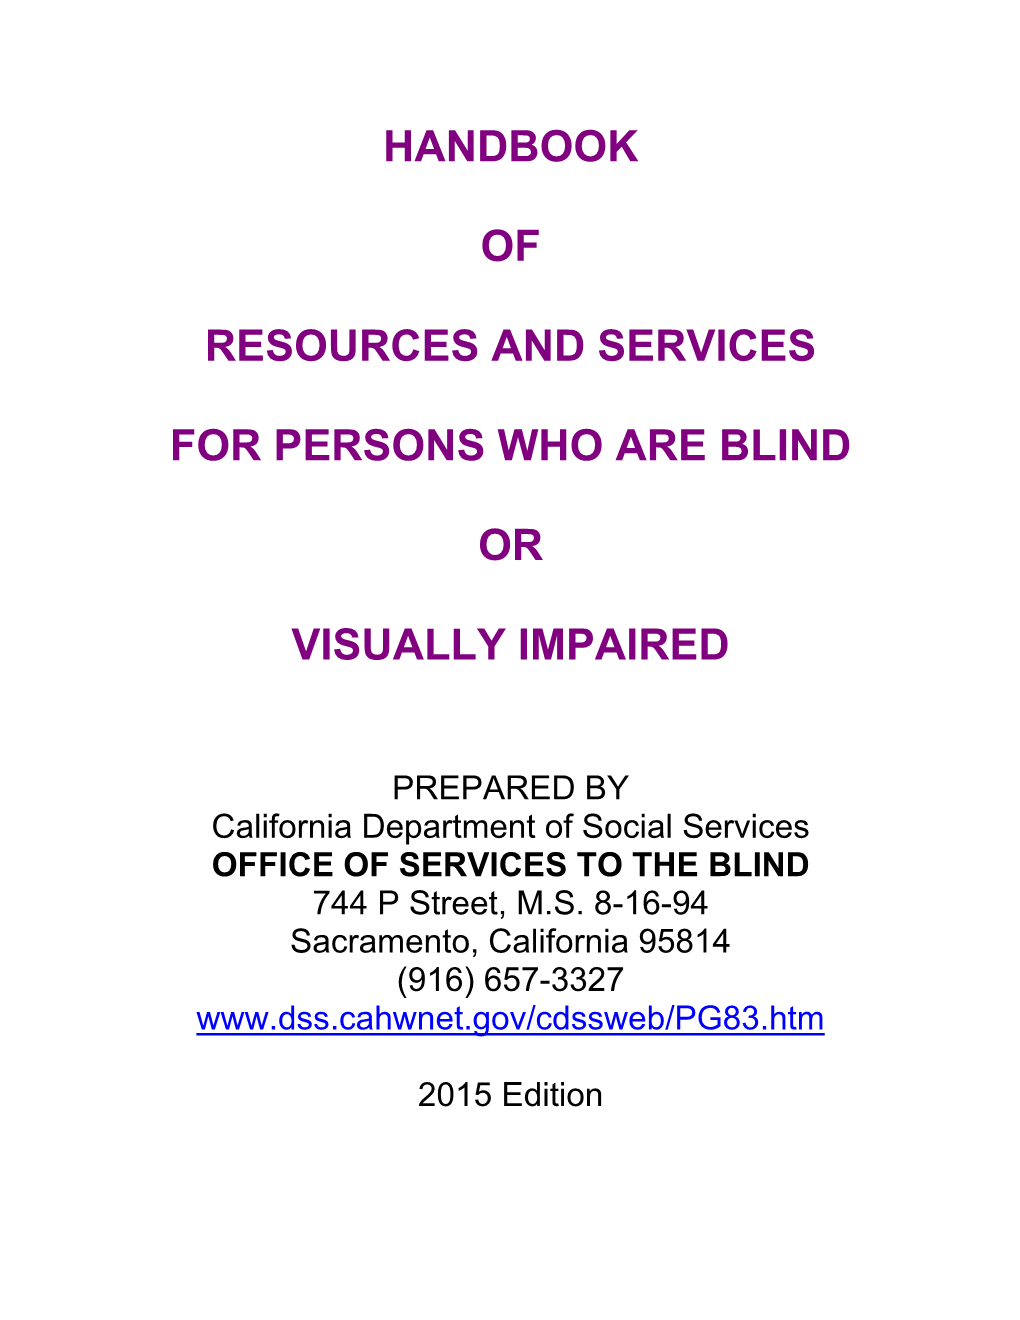 Handbook of Resources and Services for Persons Who Are Blind